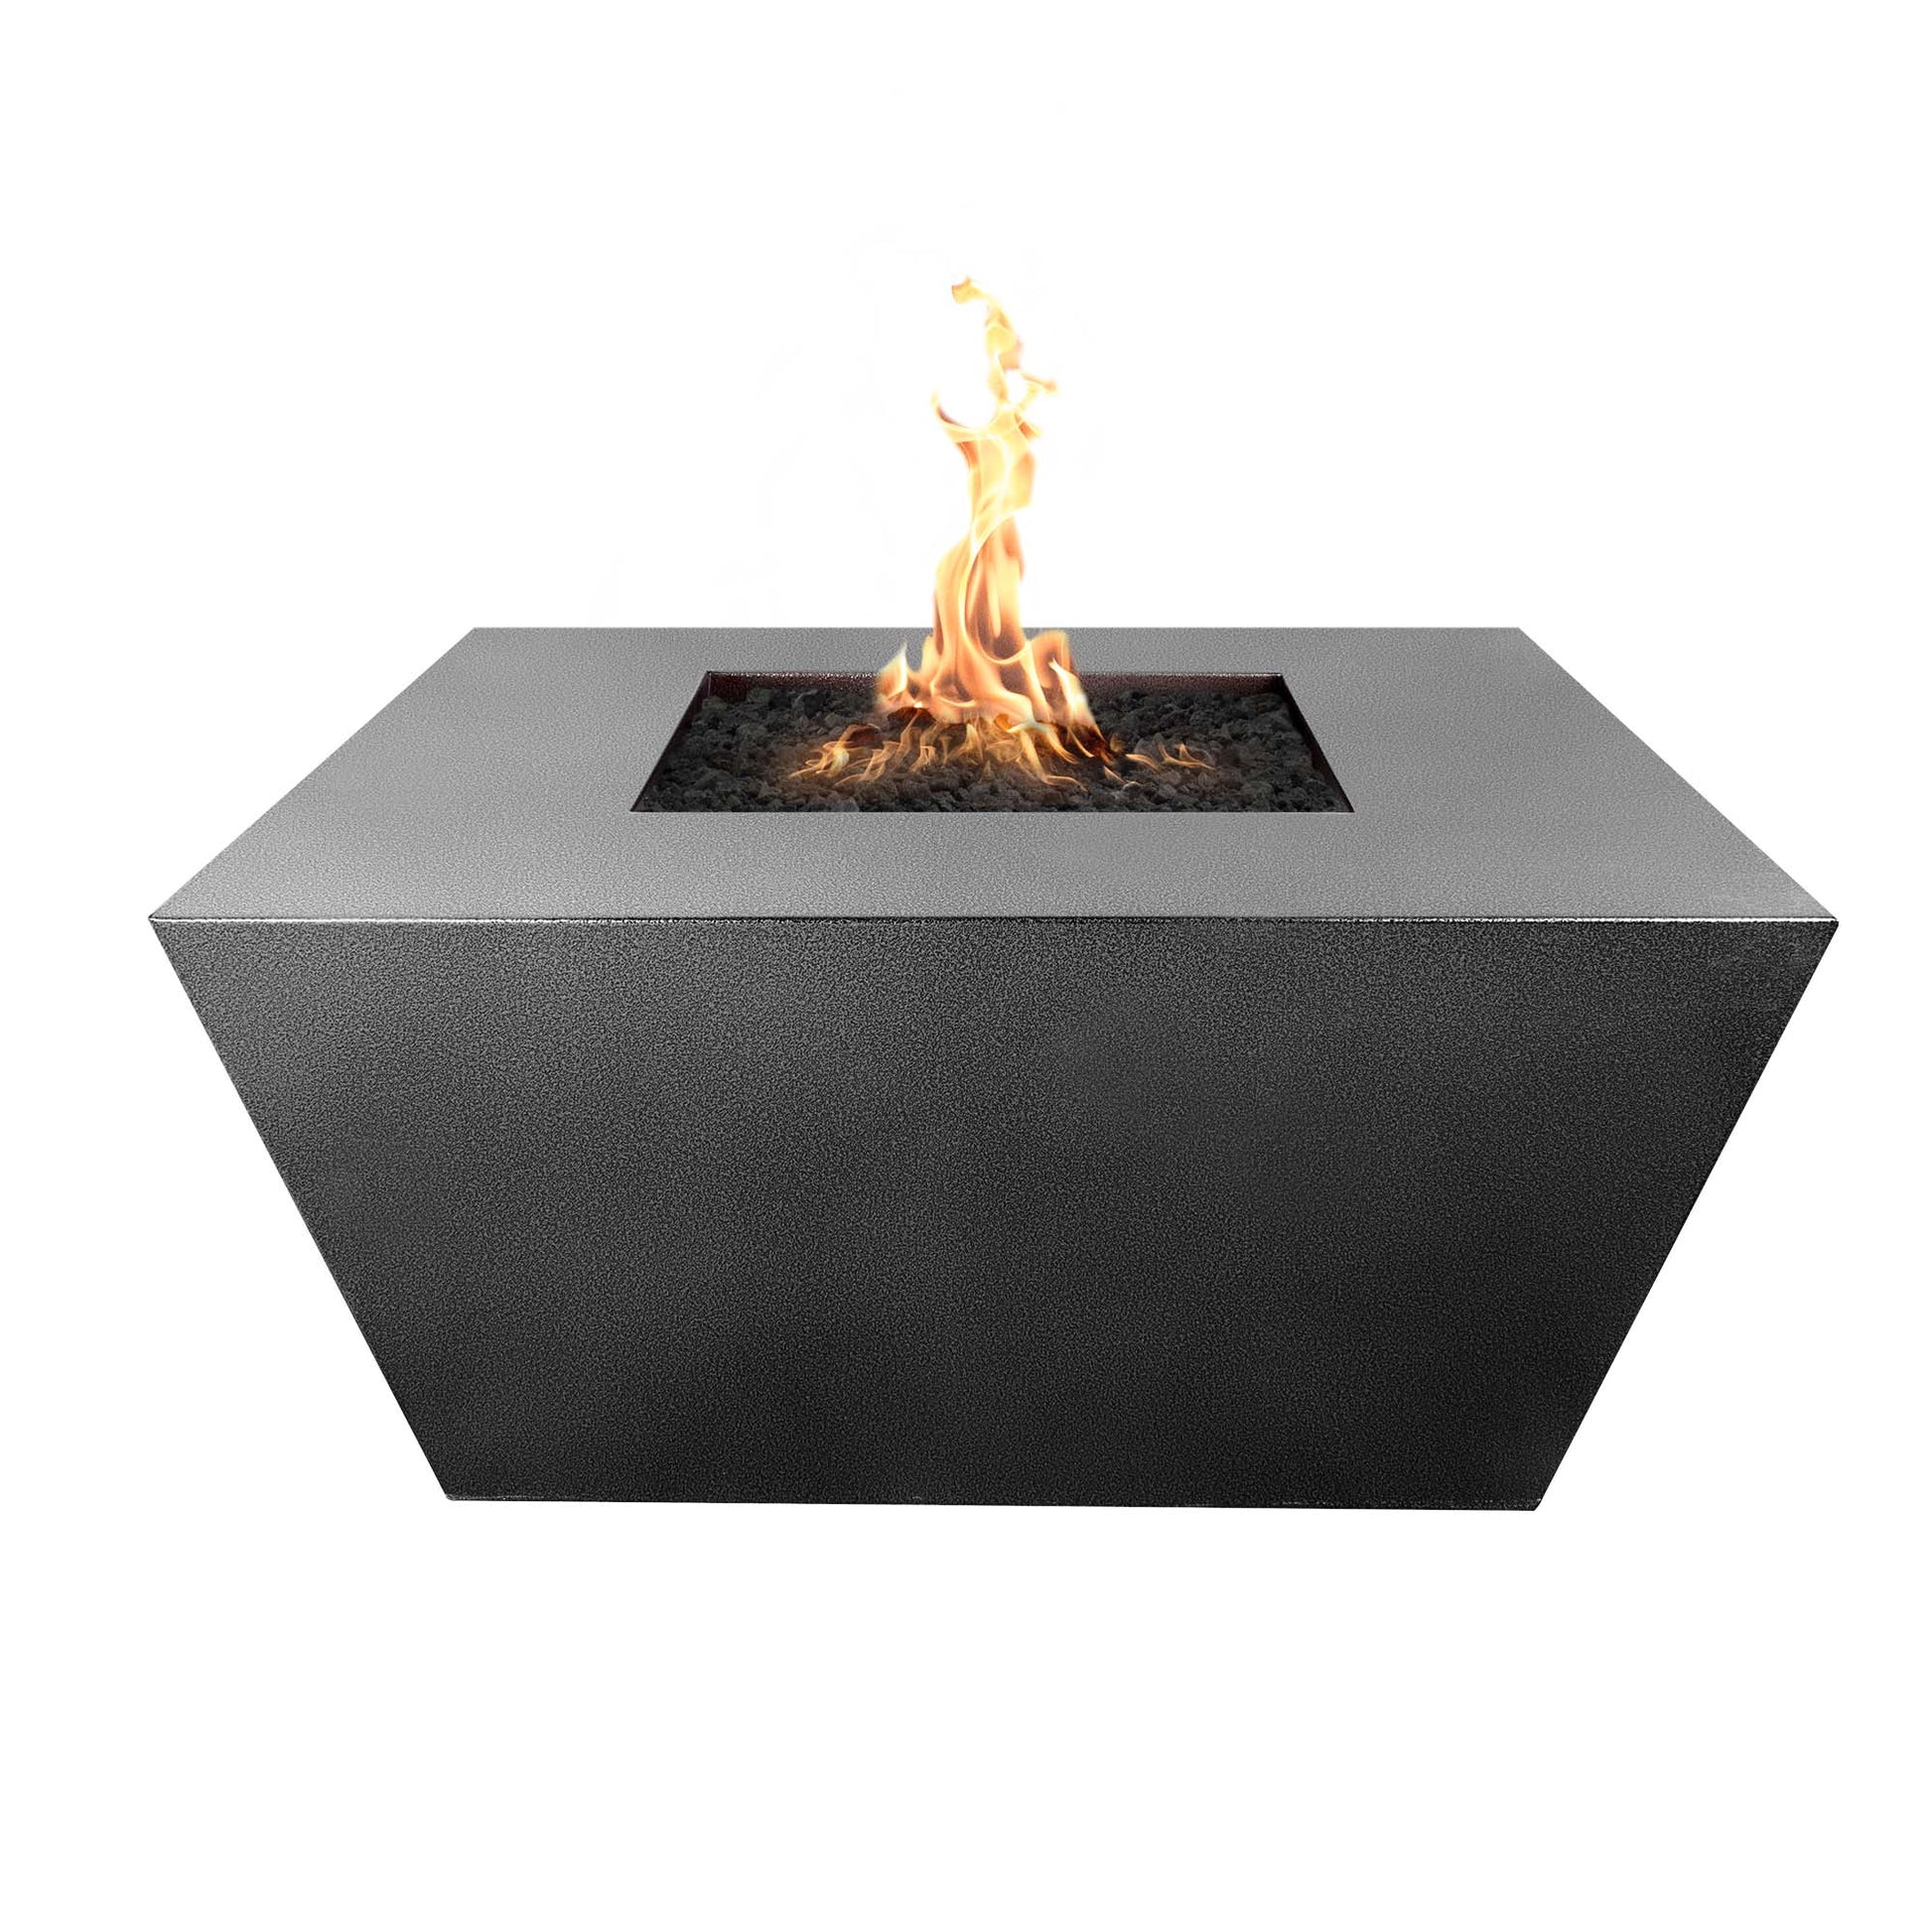 The Outdoor Plus Square Redan 36" Black Powder Coated Metal Natural Gas Fire Pit with 110V Electronic Ignition